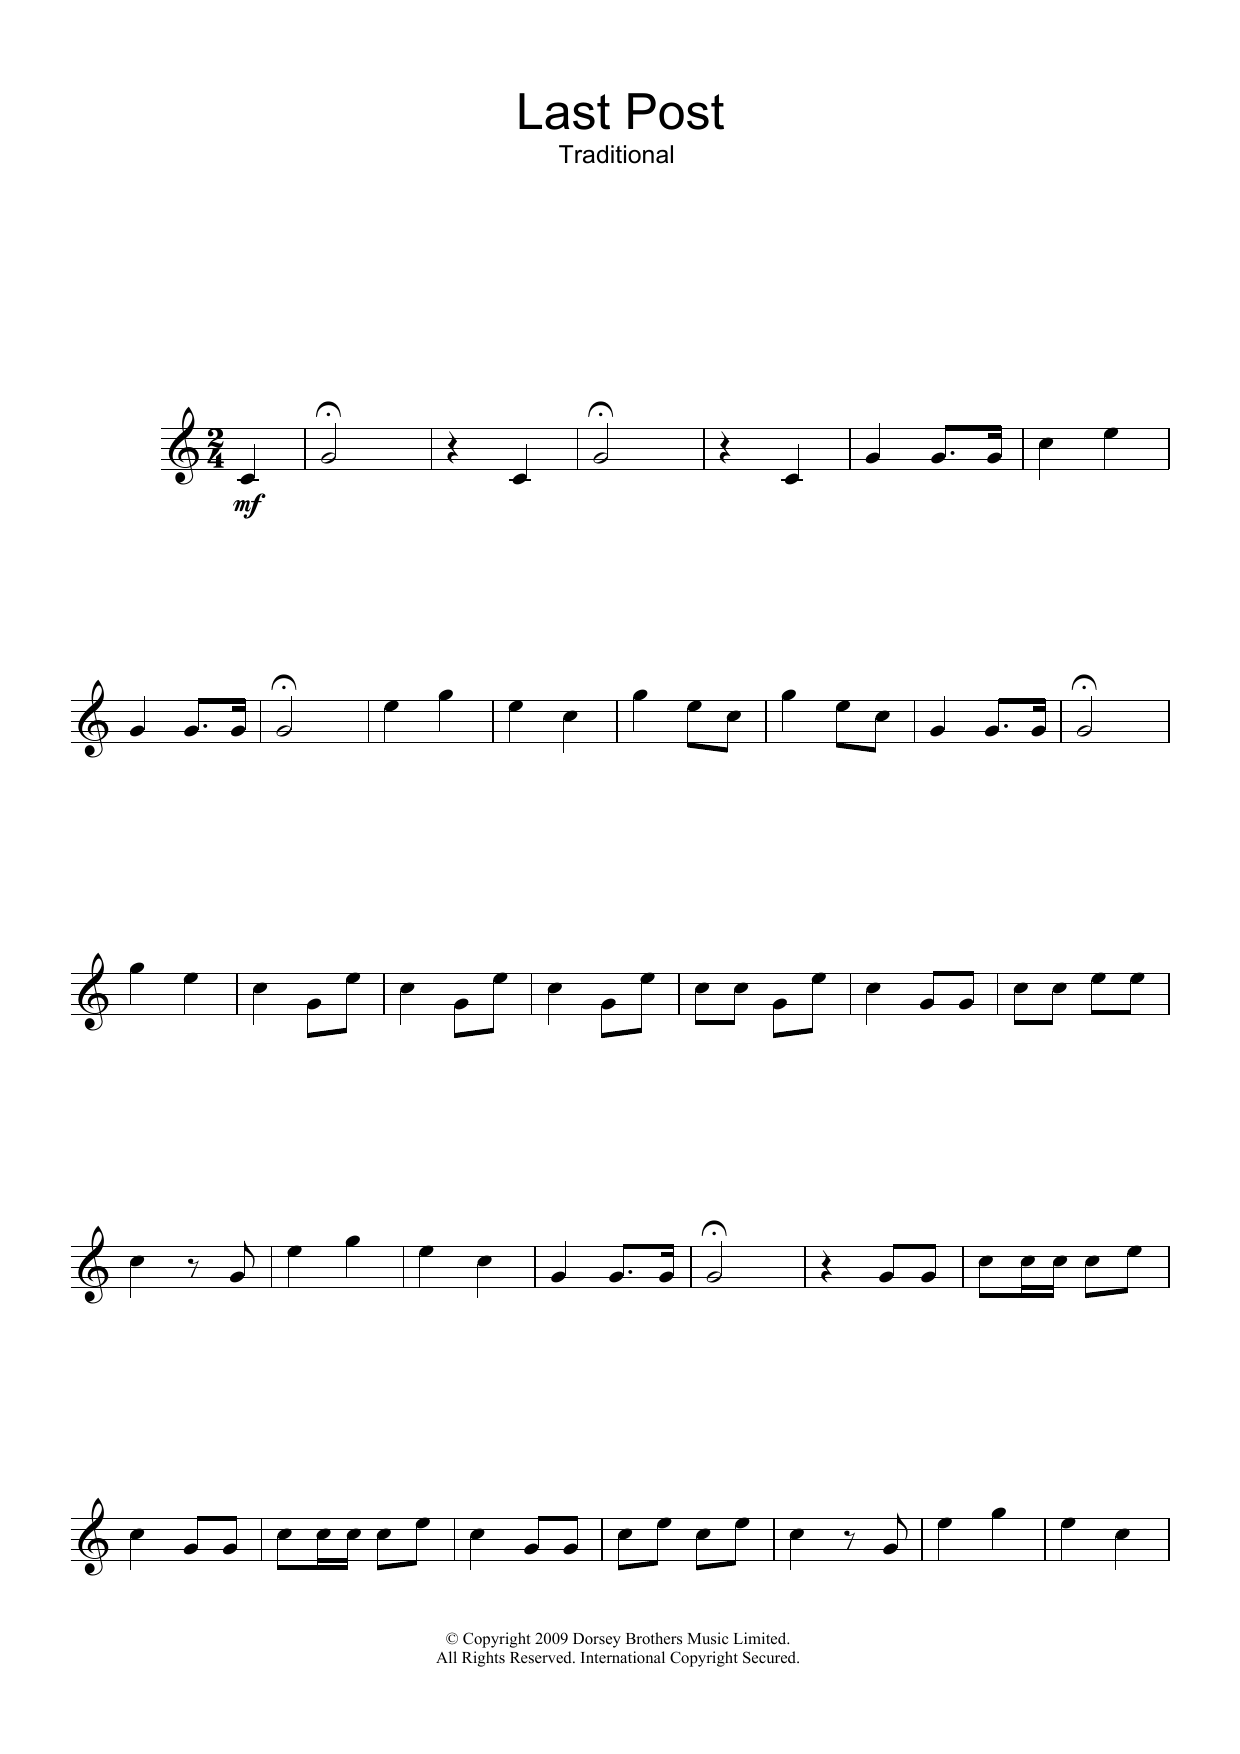 Download Traditional Last Post Sheet Music